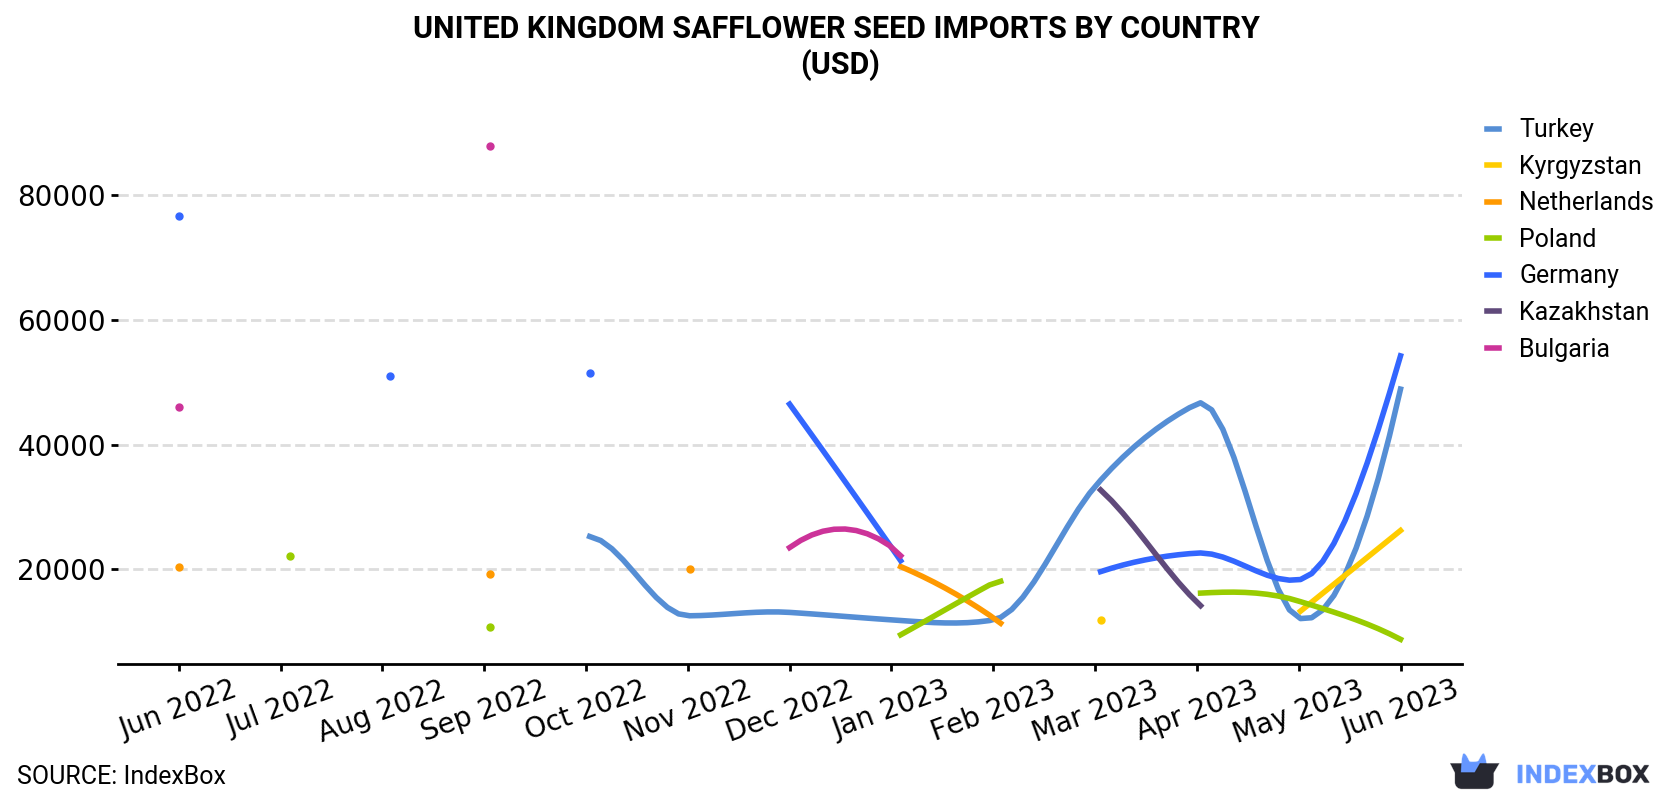 United Kingdom Safflower Seed Imports By Country (USD)